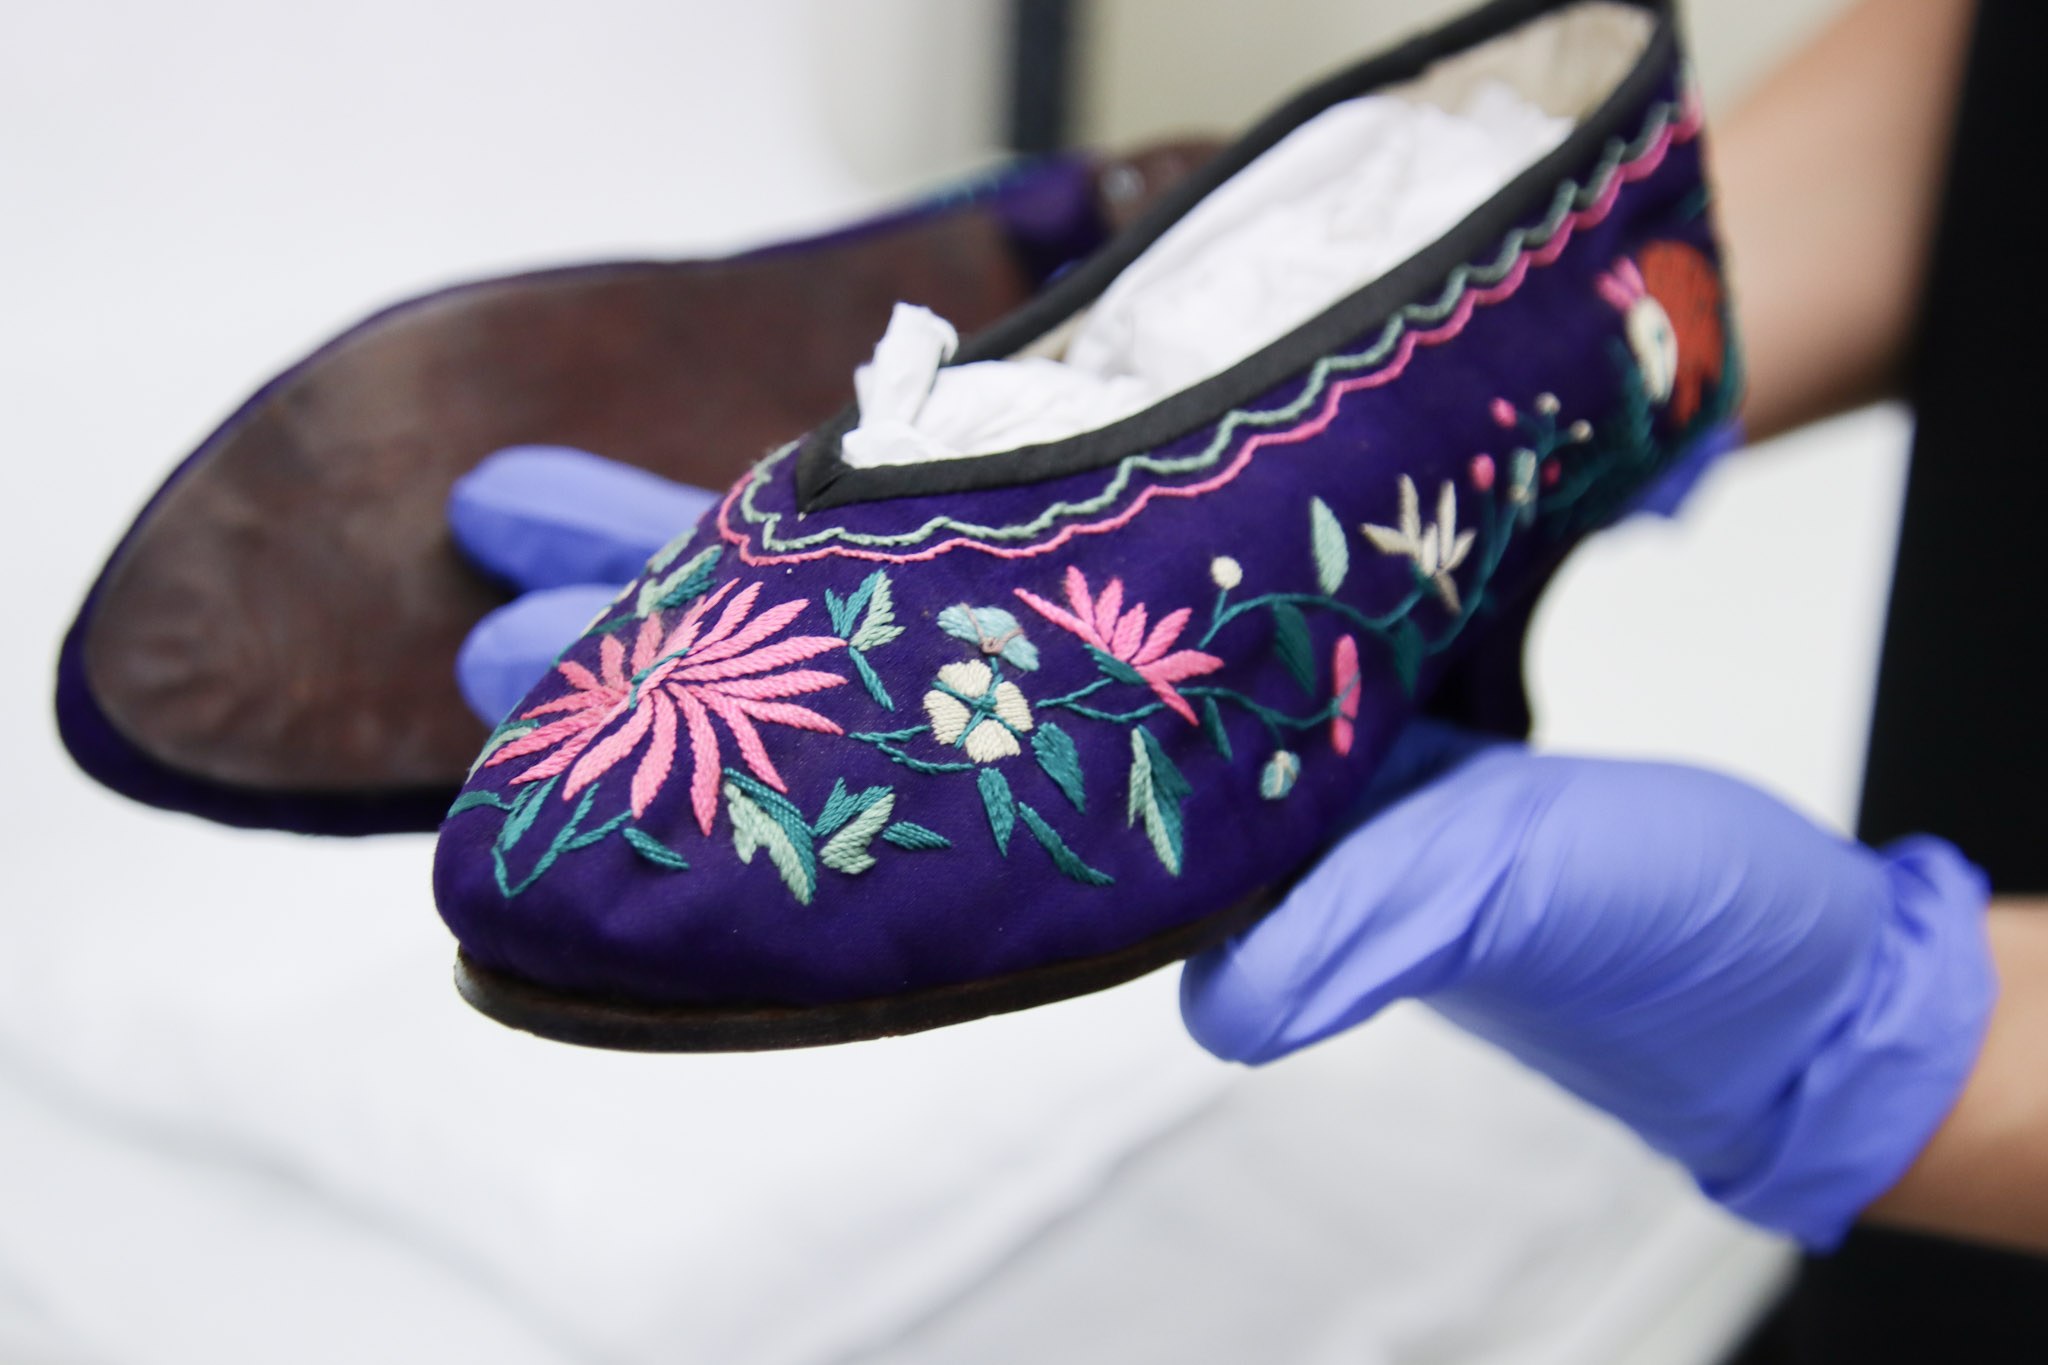 QVMAG curator demonstrates the embroidery on Ann Chung Gon's shoes